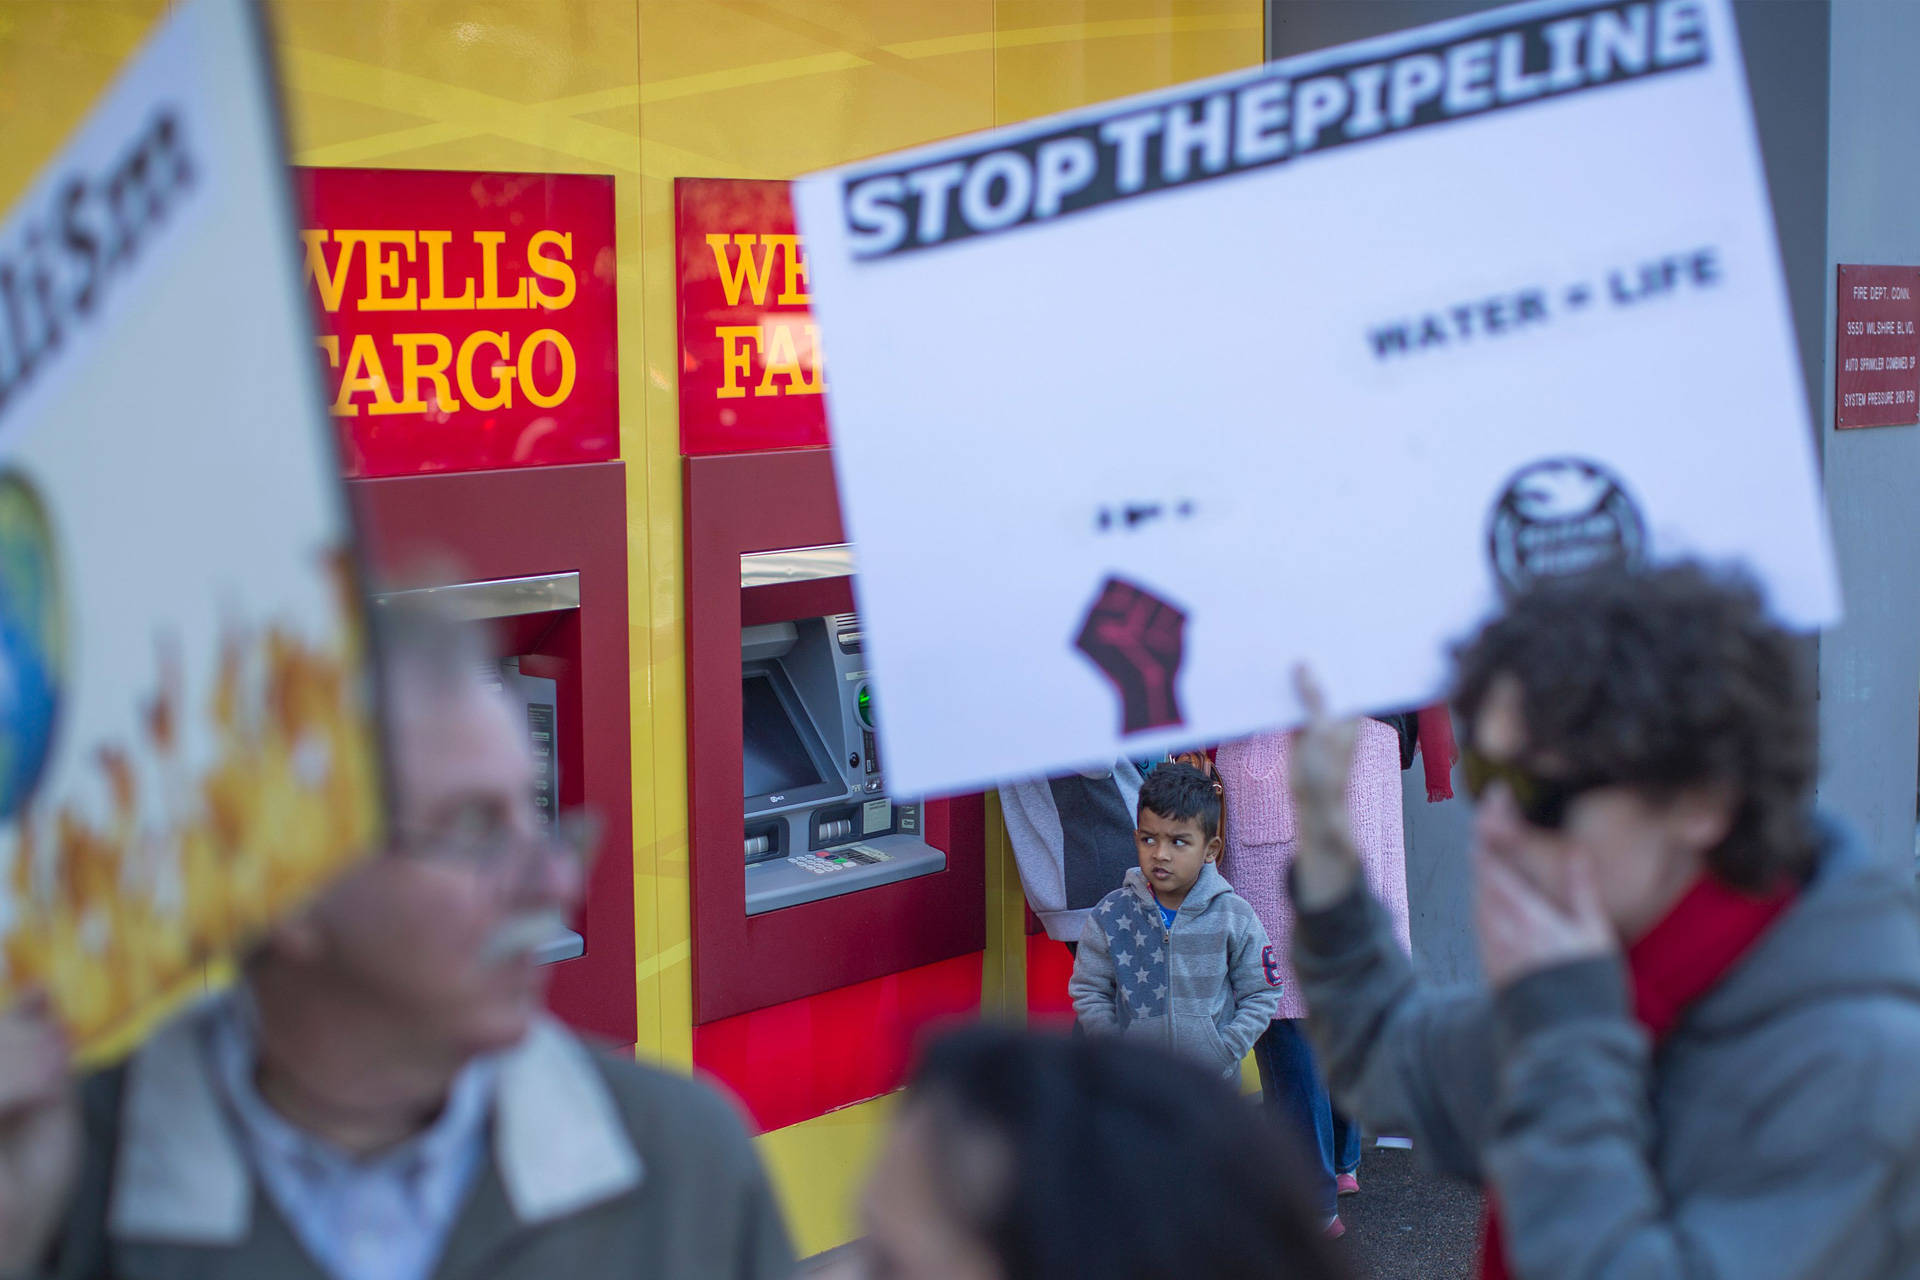 Supporters of the Standing Rock Water Protectors call on banks to divest from the Dakota Access Pipeline in a protest outside a Wells Fargo branch in Los Angeles on Dec. 16, 2016. David McNew/AFP/Getty Images